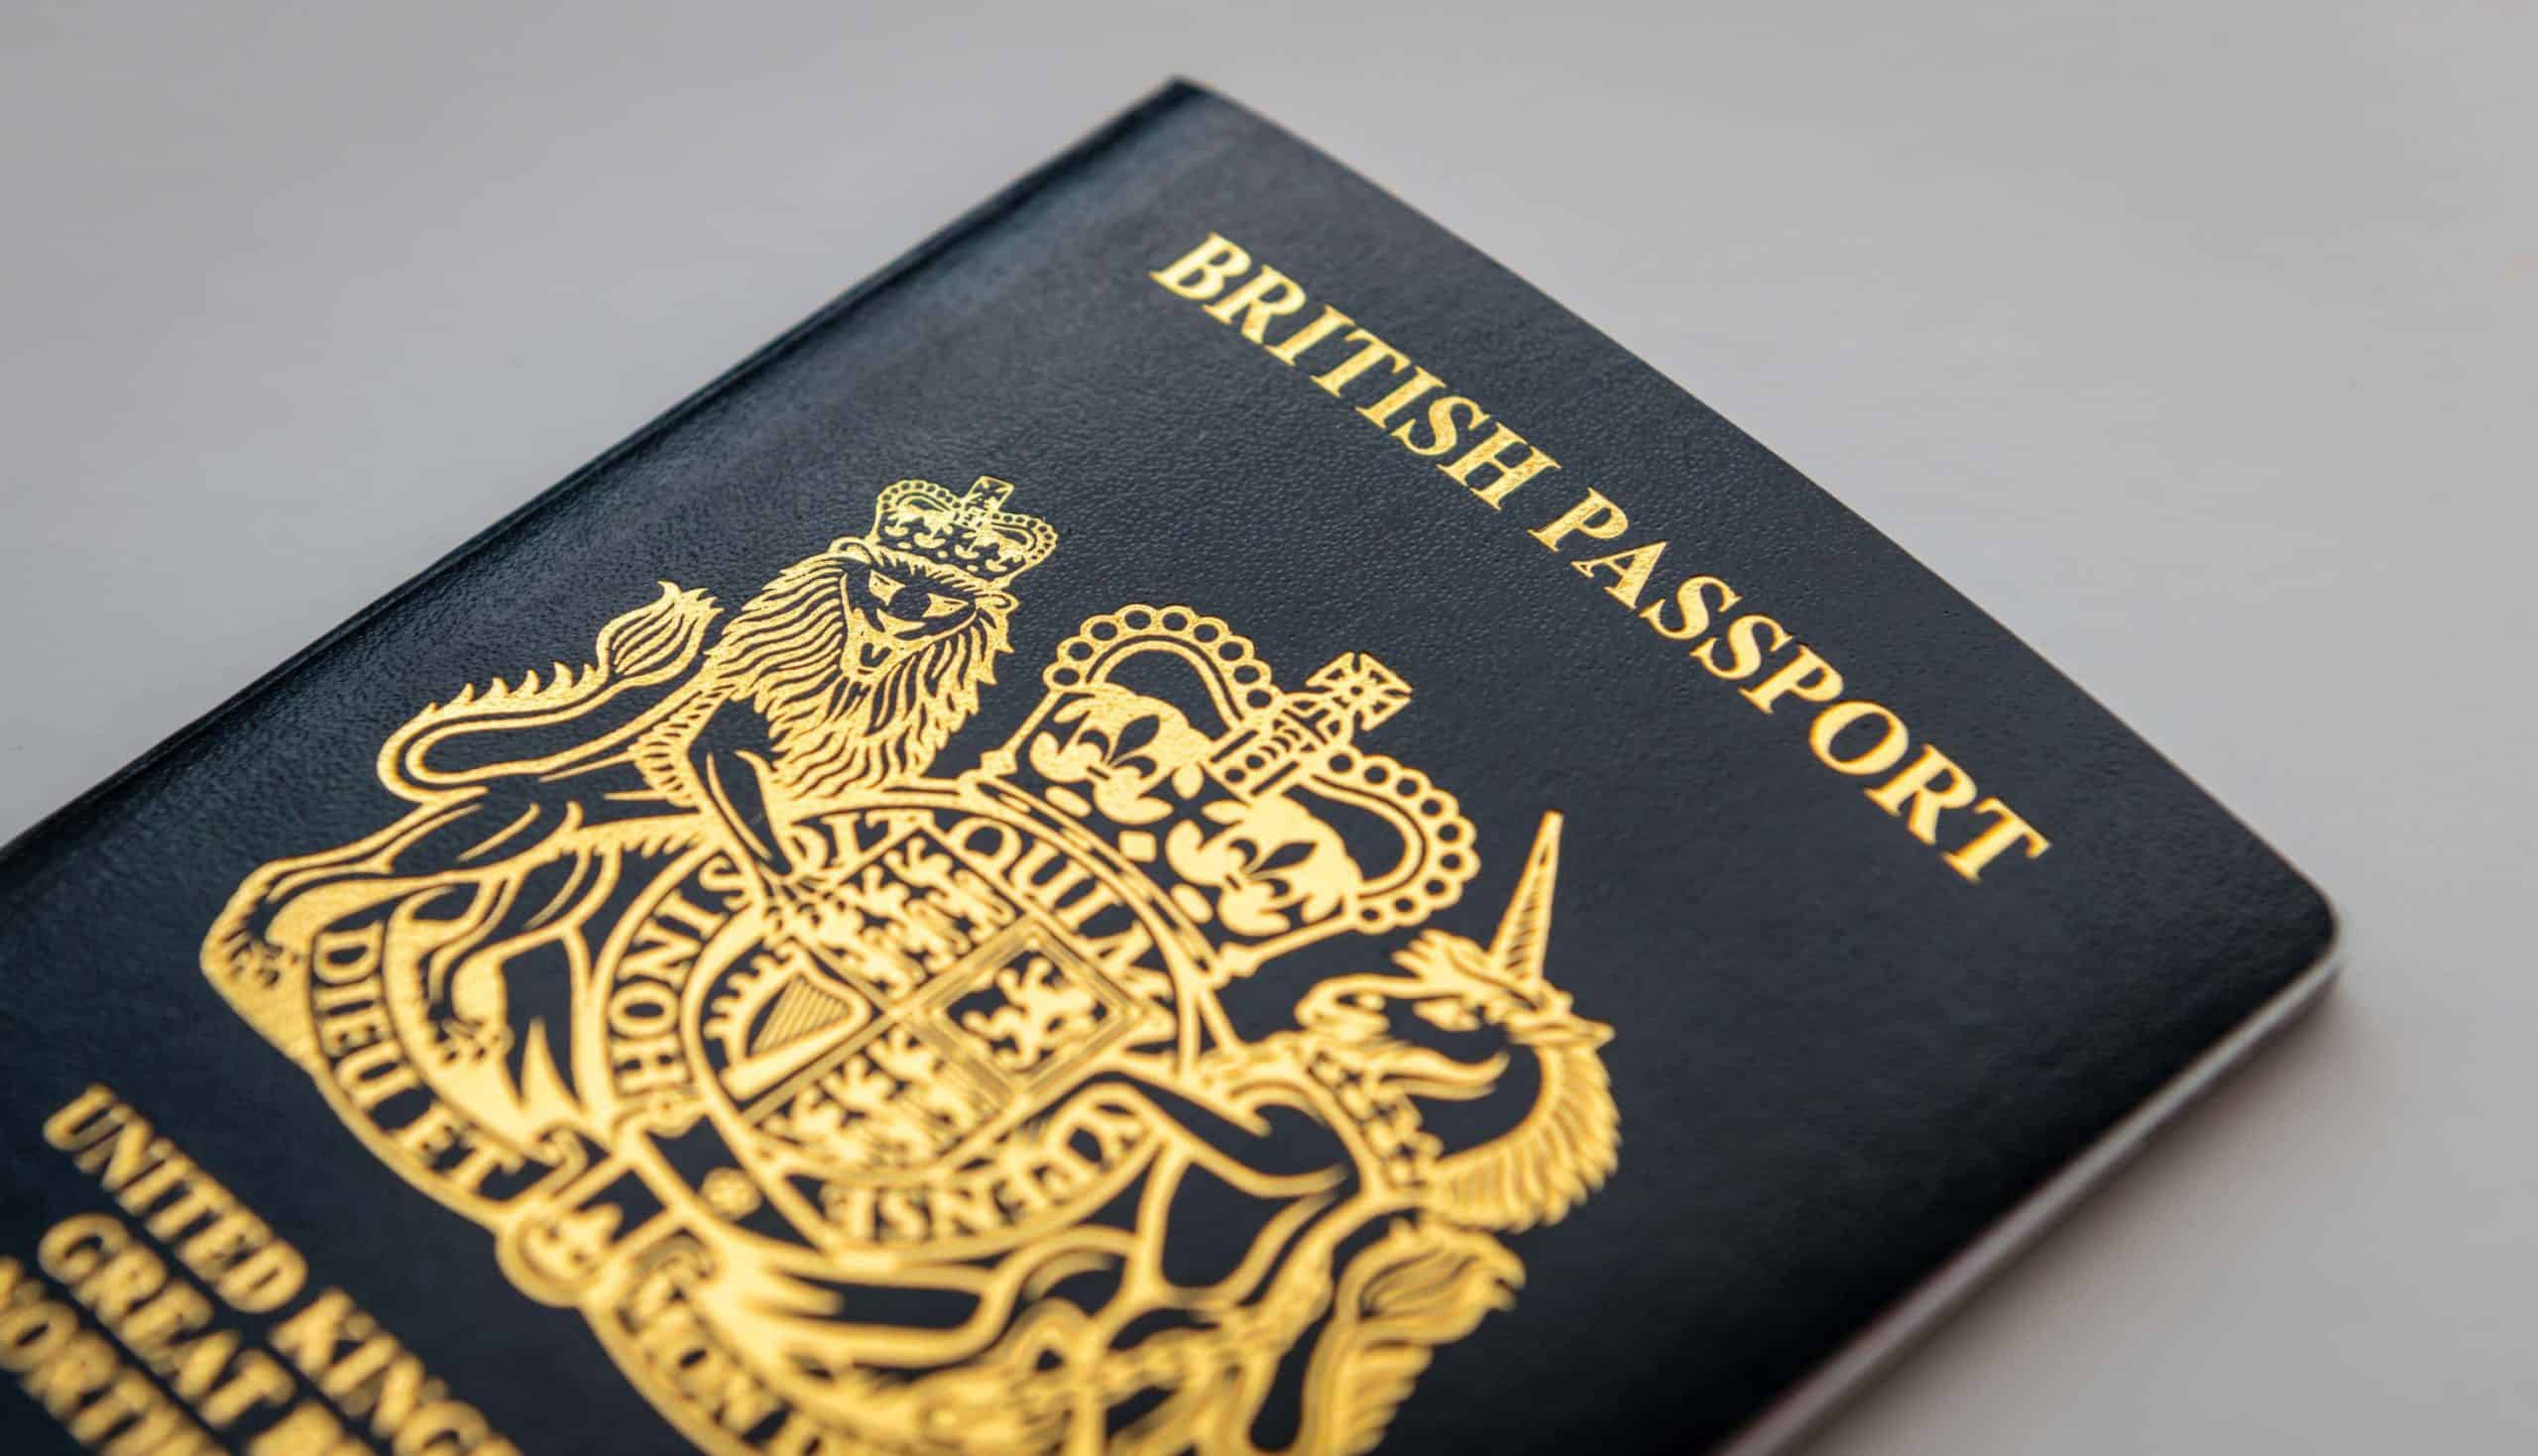 Number of people giving up UK citizenship soars post-Brexit